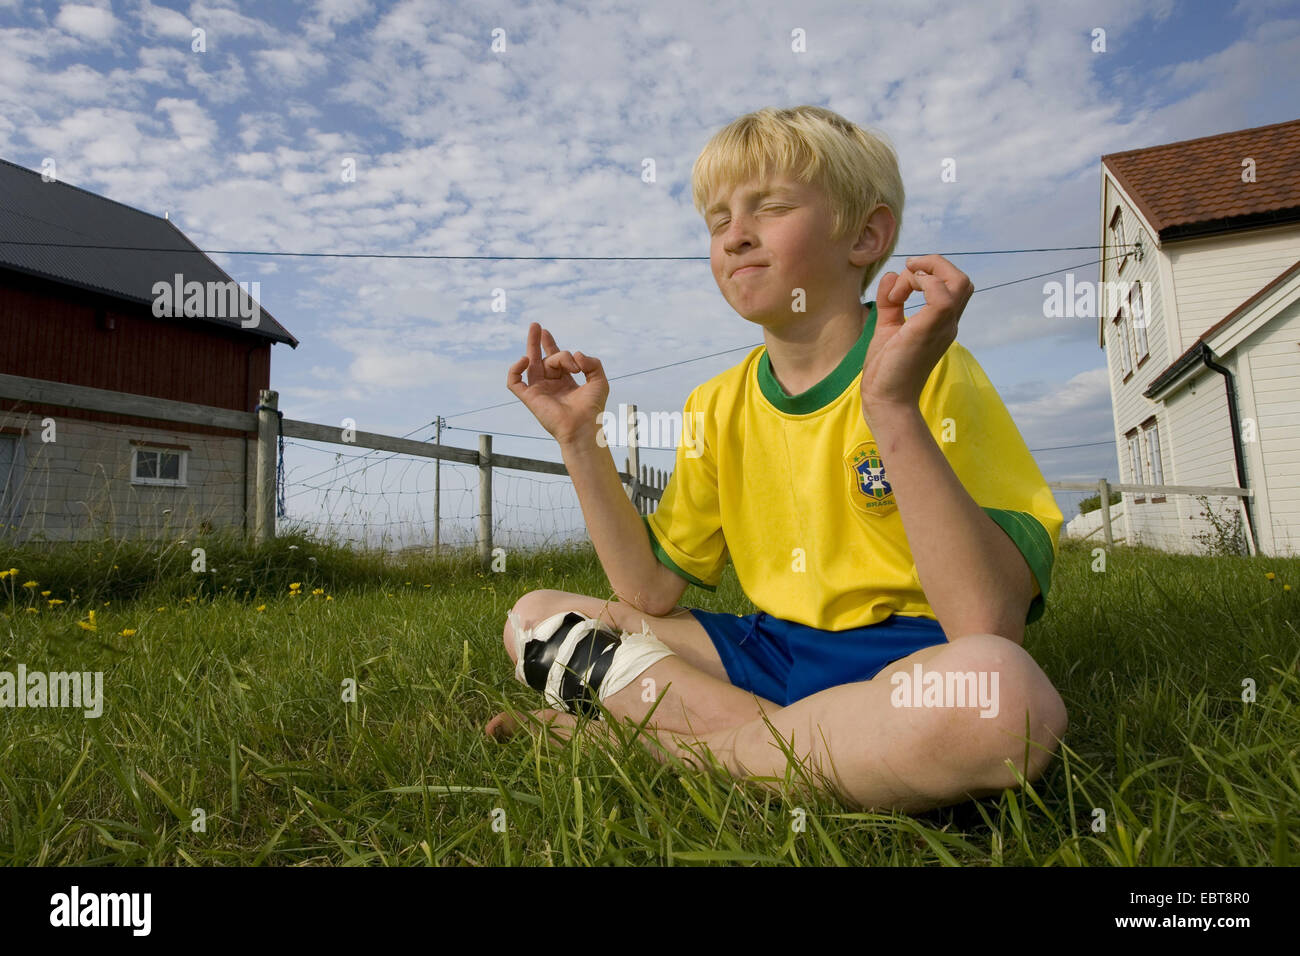 young boy playing in lotus position, Norway Stock Photo